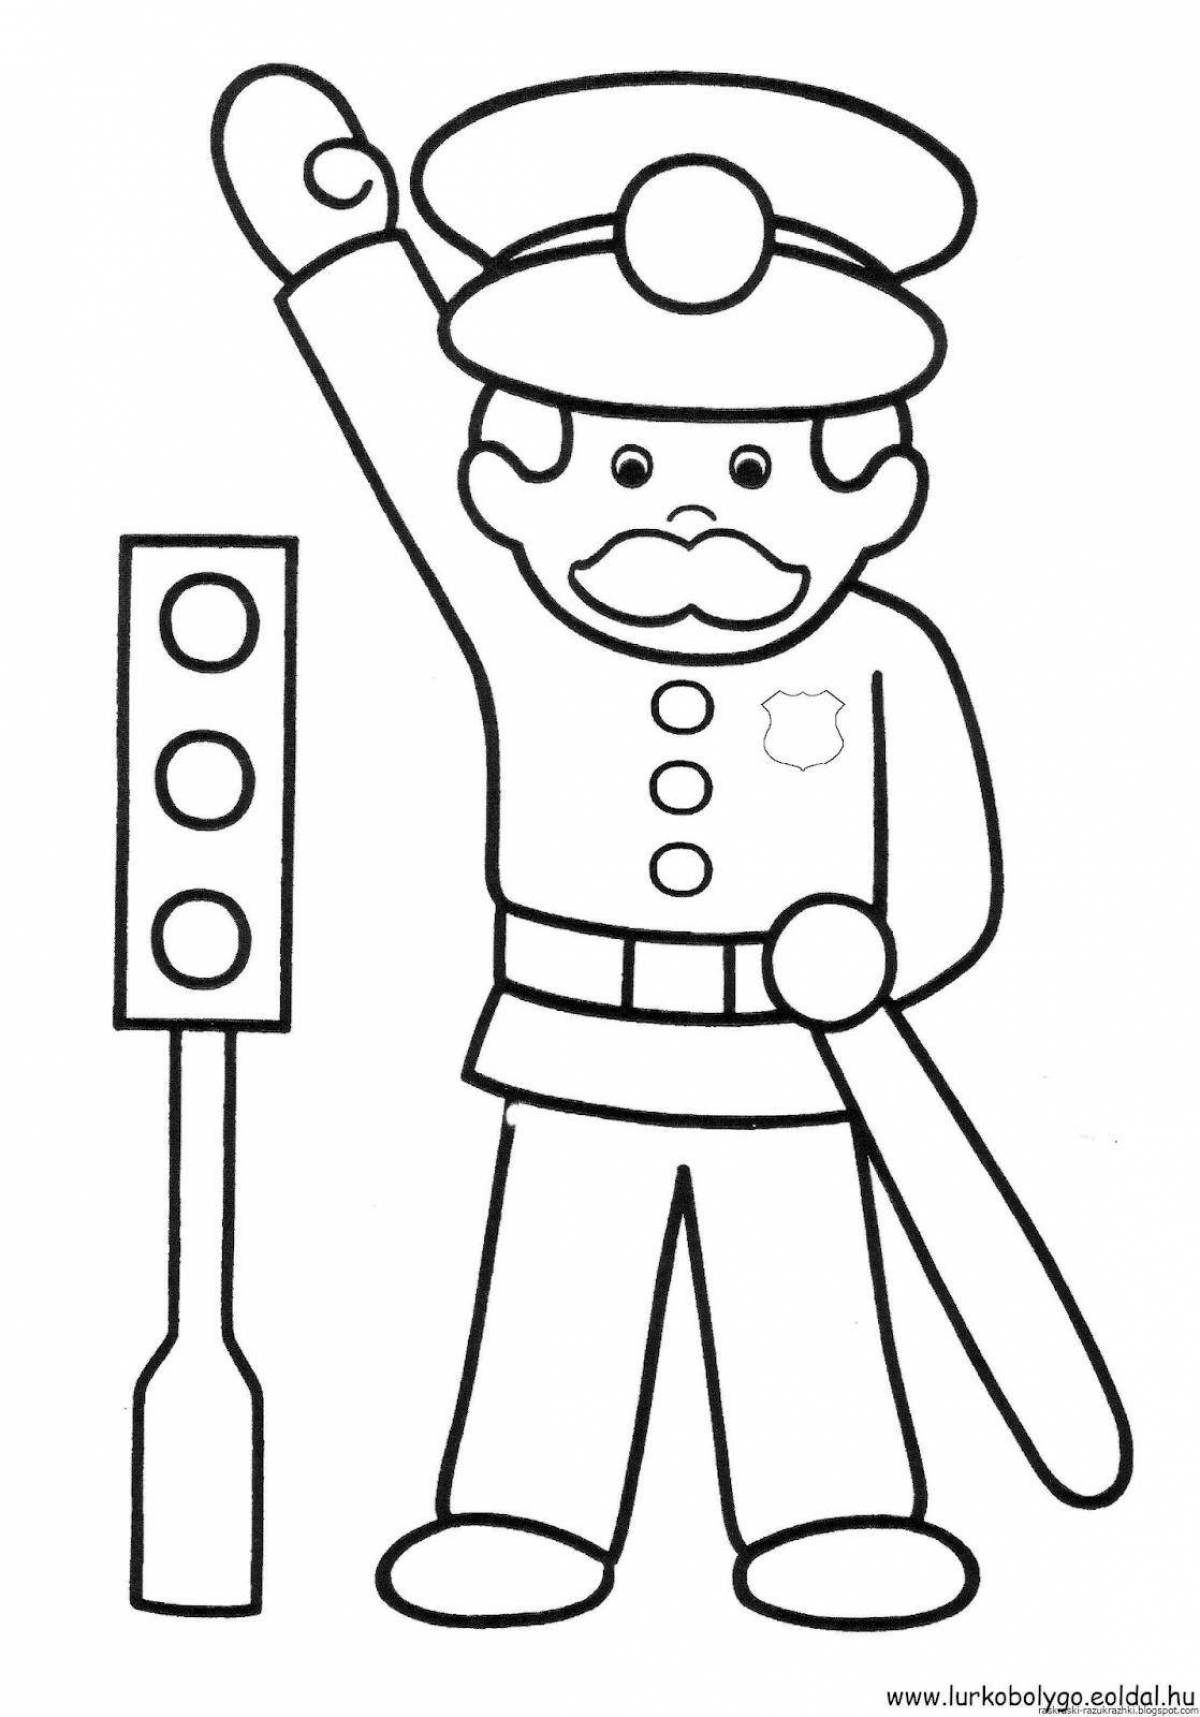 Fun job coloring pages for preschoolers 6-7 years old